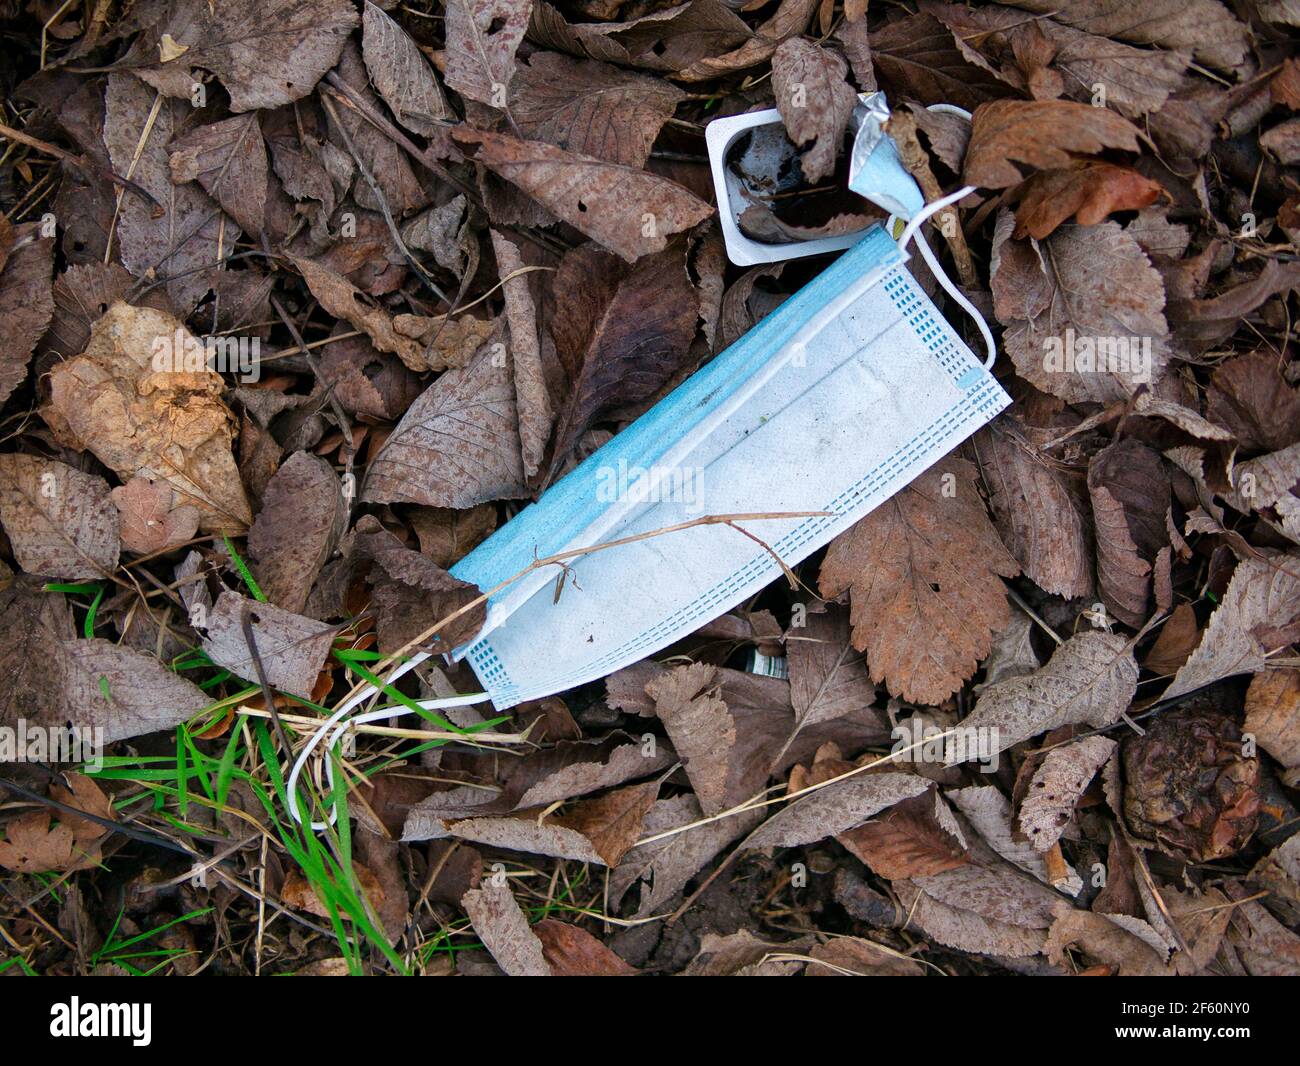 A used, blue surgical mask used for COVID-19 PPE protection, discarded as litter by a rural countryside hedgerow causing environmental pollution Stock Photo